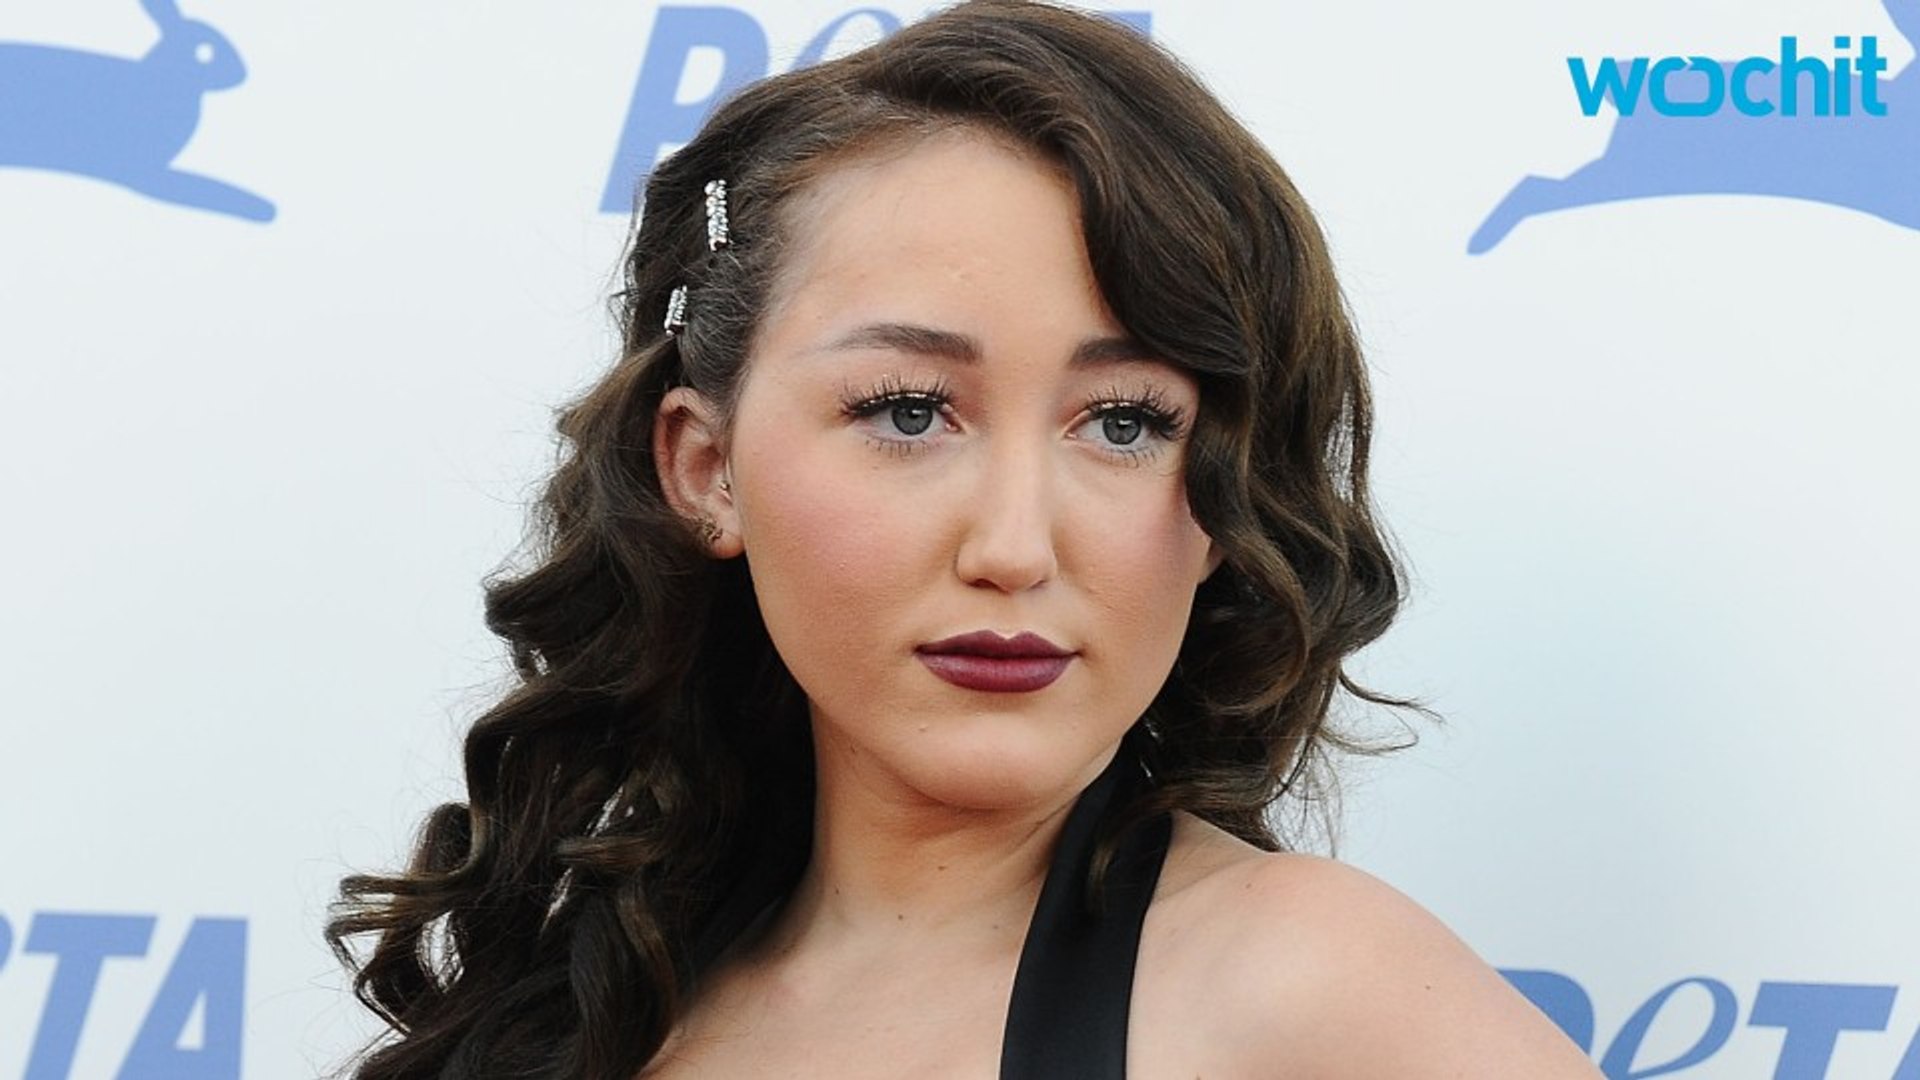 Miley Cyrus' Little Sister Noah Cyrus Released First Single